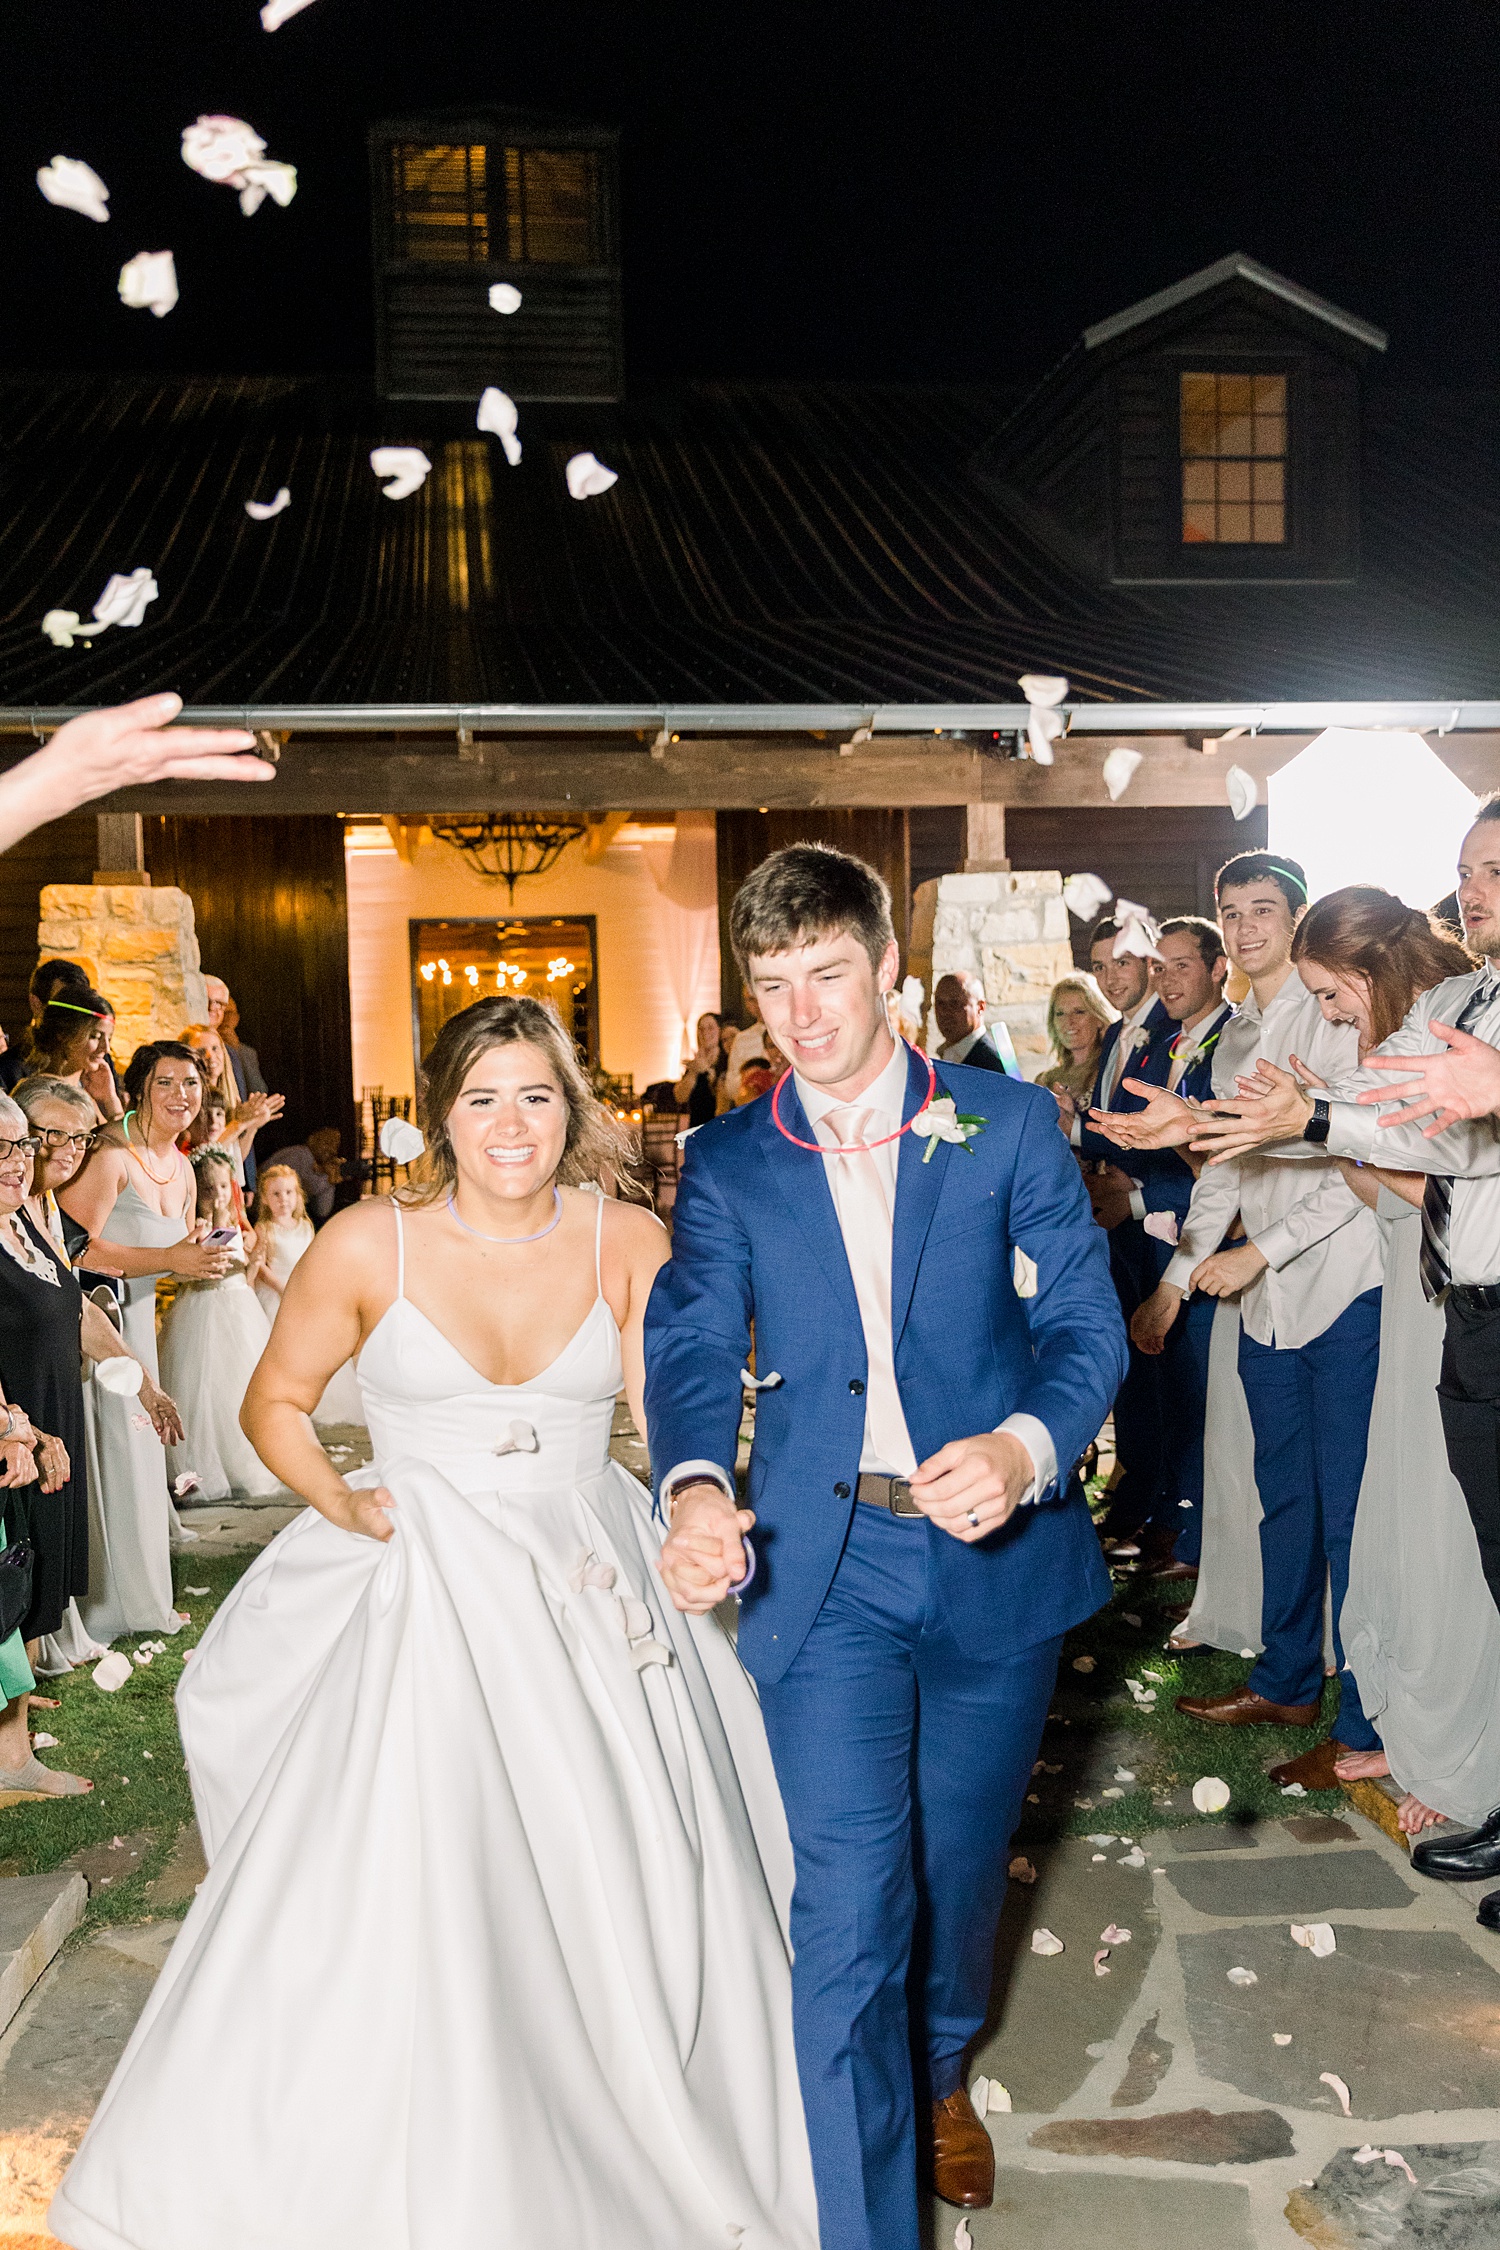 wedding guests throw flower pedals at newlyweds at the end of the night